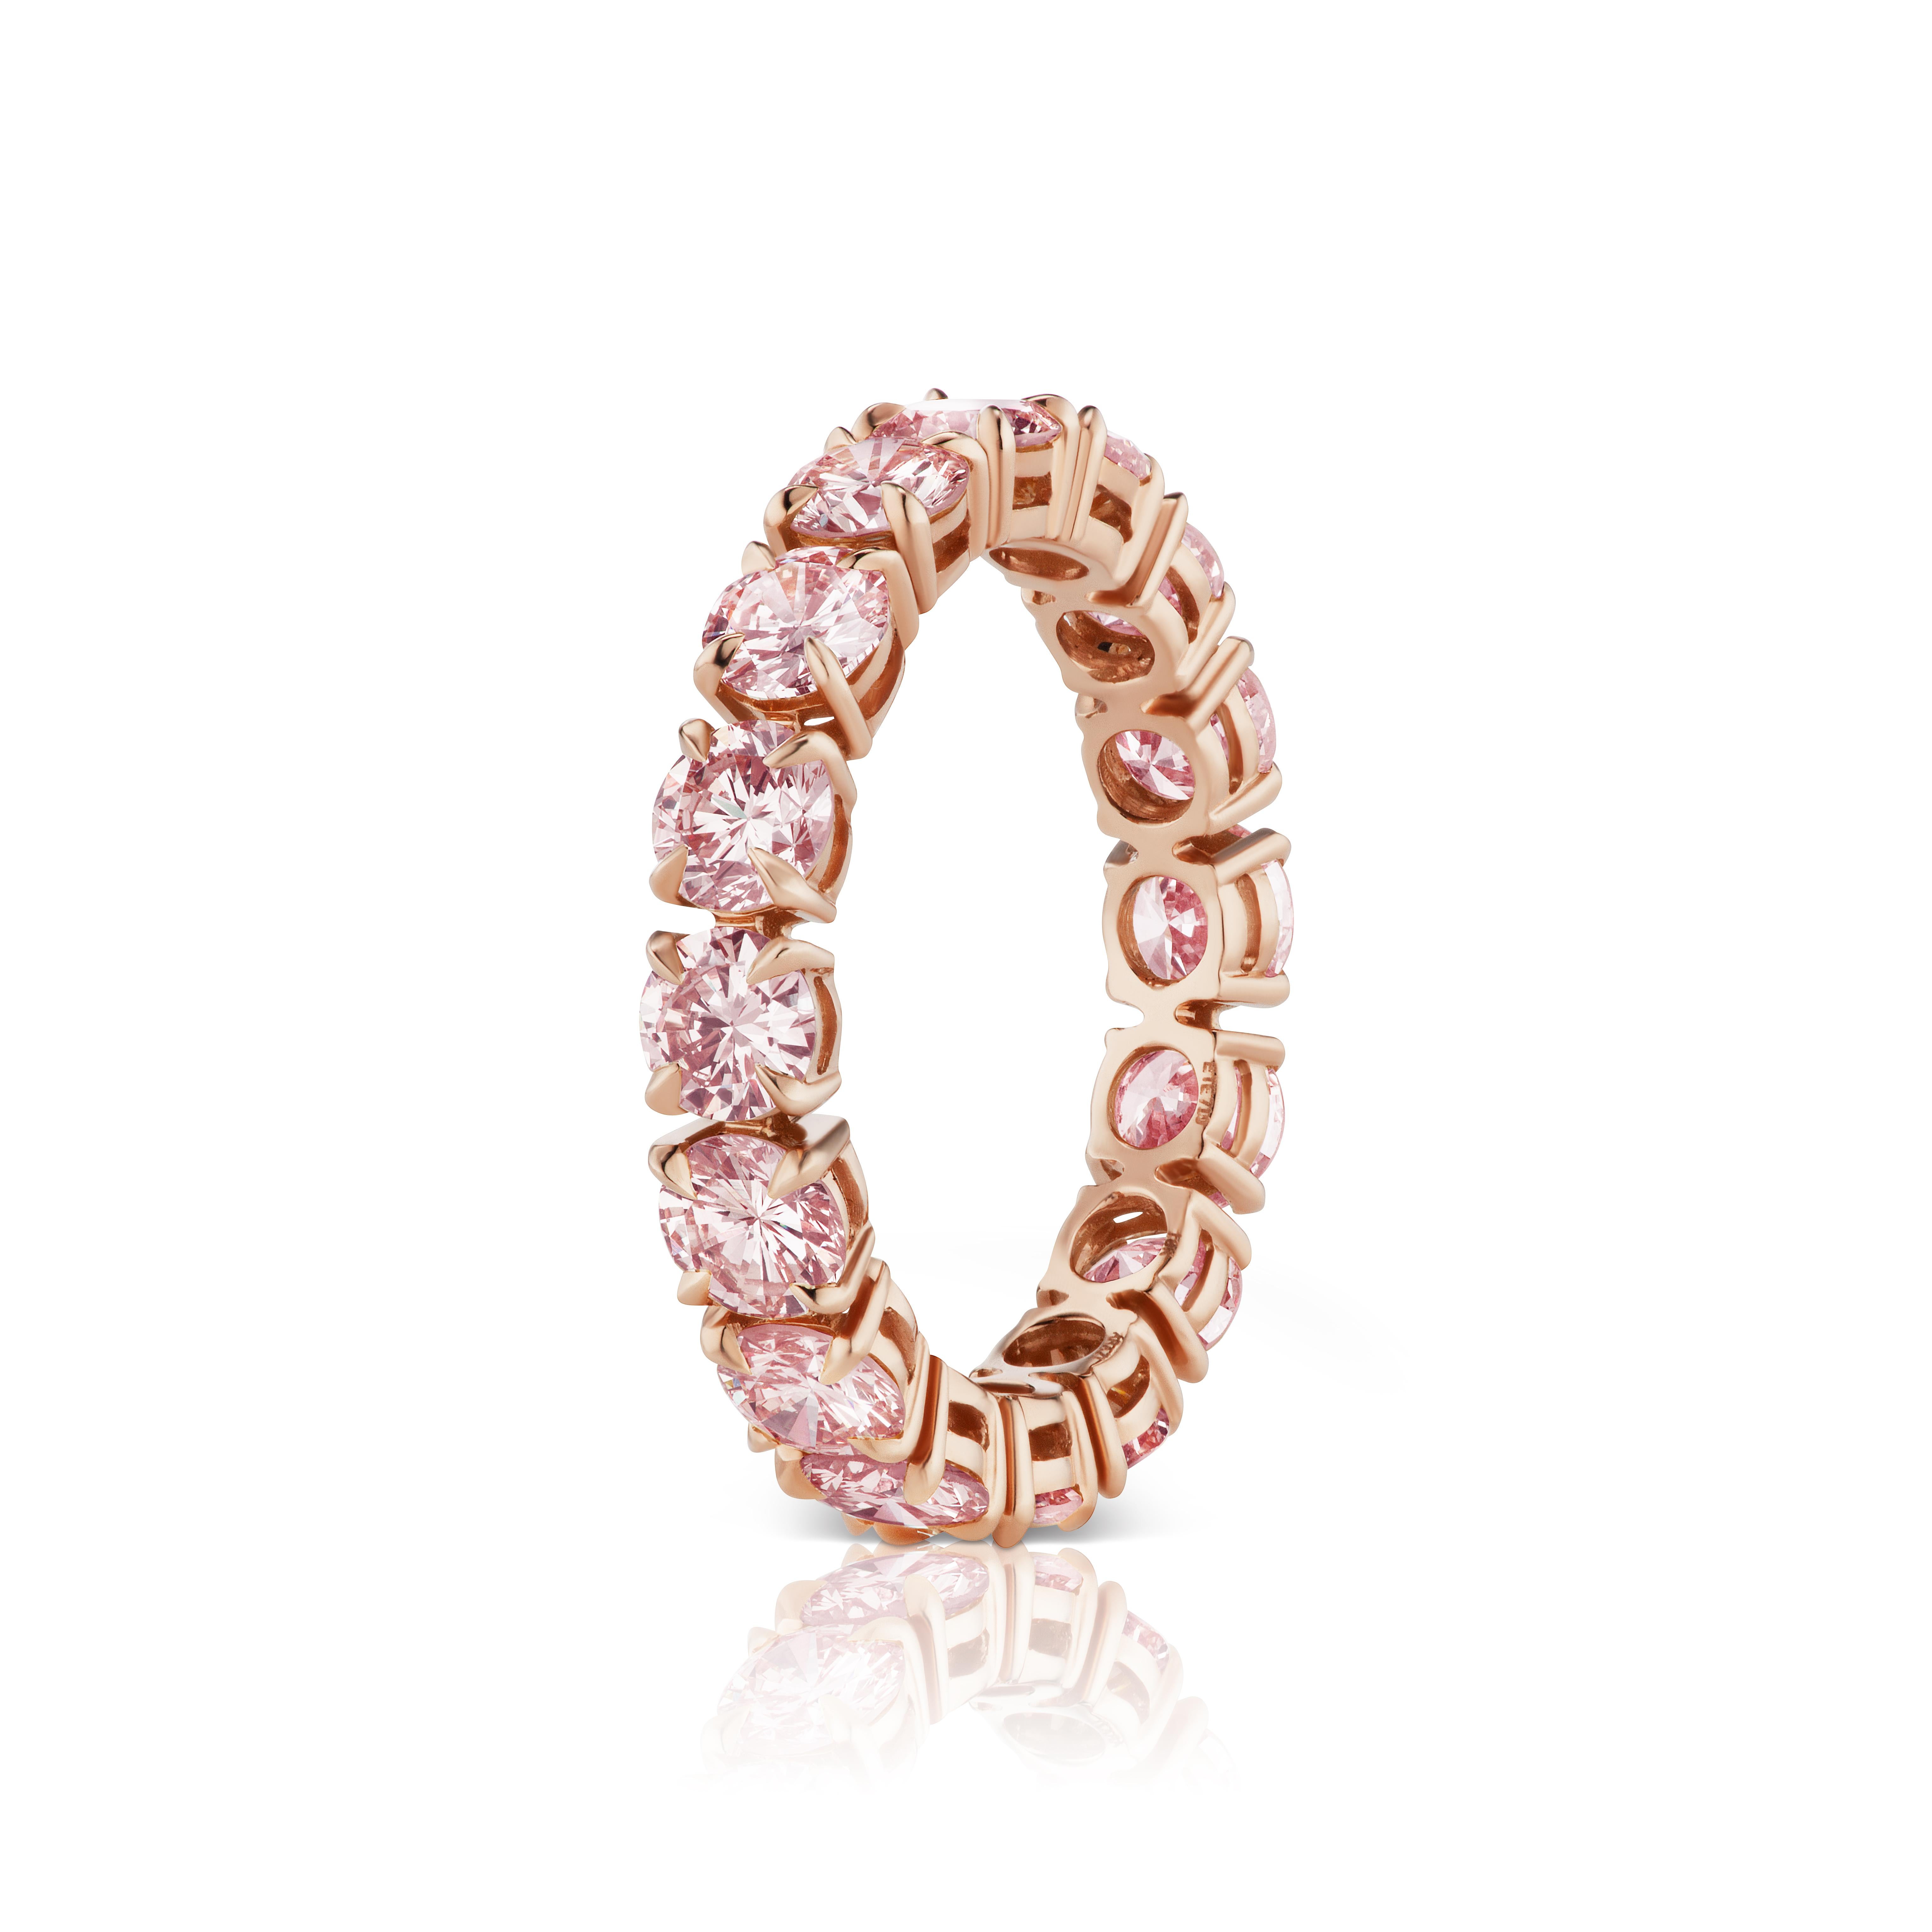 16 Round Pink Diamonds weighing between 0.15-0.22 Carat Each set in a 4-prong Eternity Band Style using 18 Karat Rose Gold. 
2.88 Carat Total weight.
Size 5.5. Can be resized.